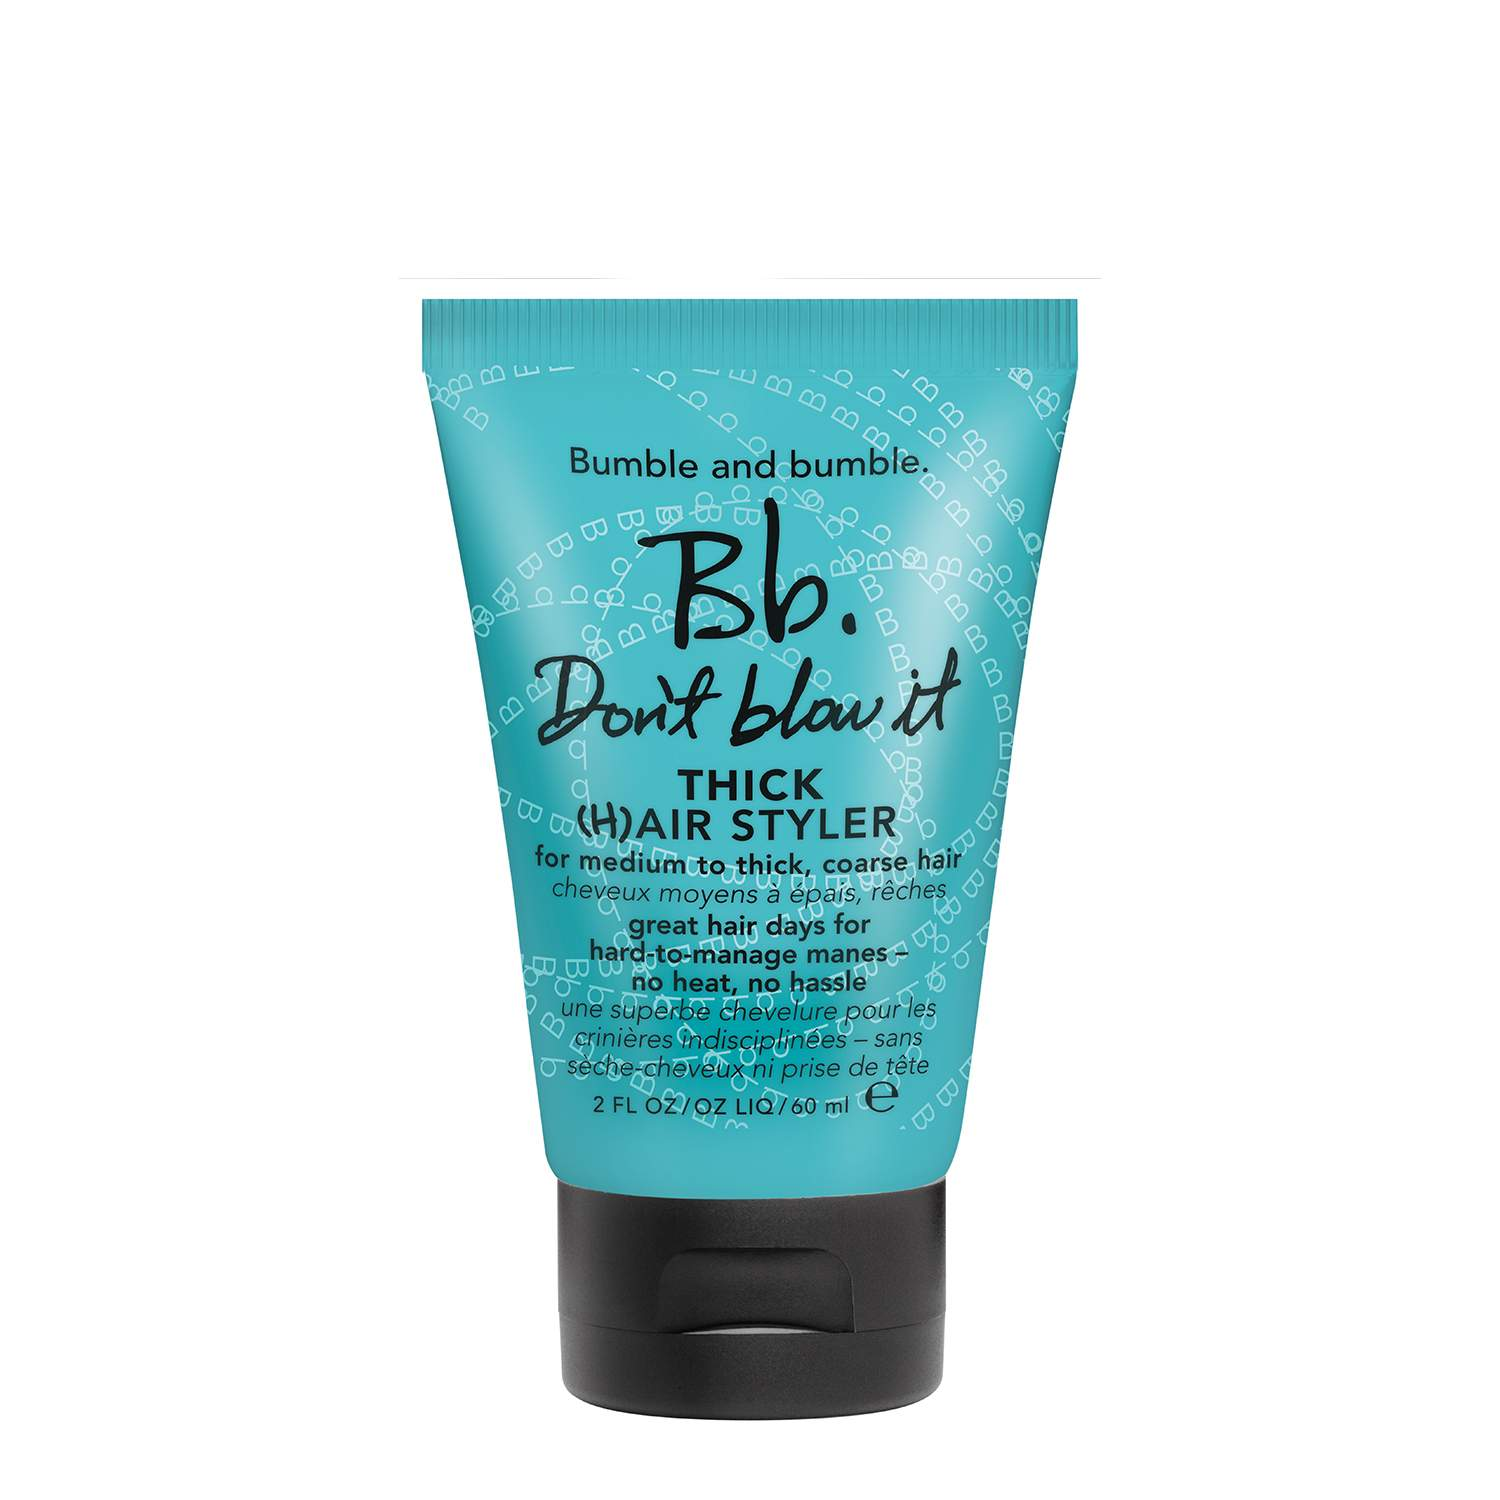 Bumble and bumble. Don't Blow It Thick - Travel Size Bumble and bumble. Don't Blow It Thick - Travel Size 1